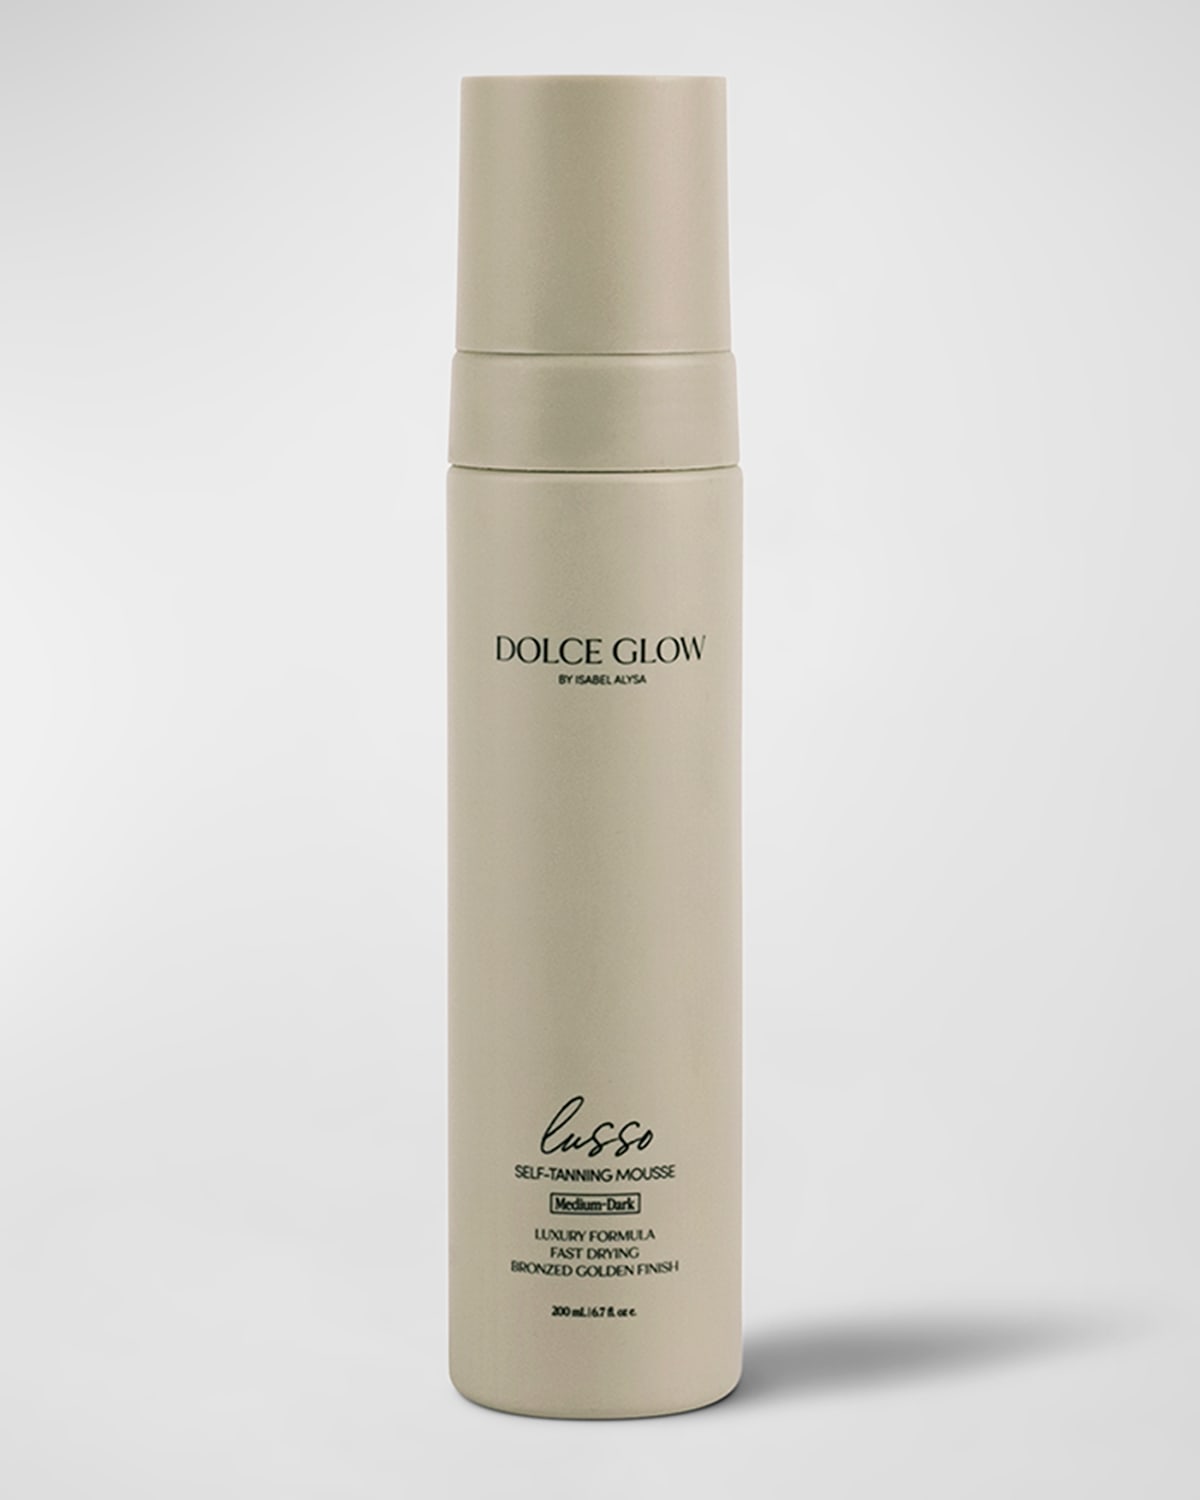 Shop Dolce Glow 6.8 Oz. Lusso Self-tanning Mousse